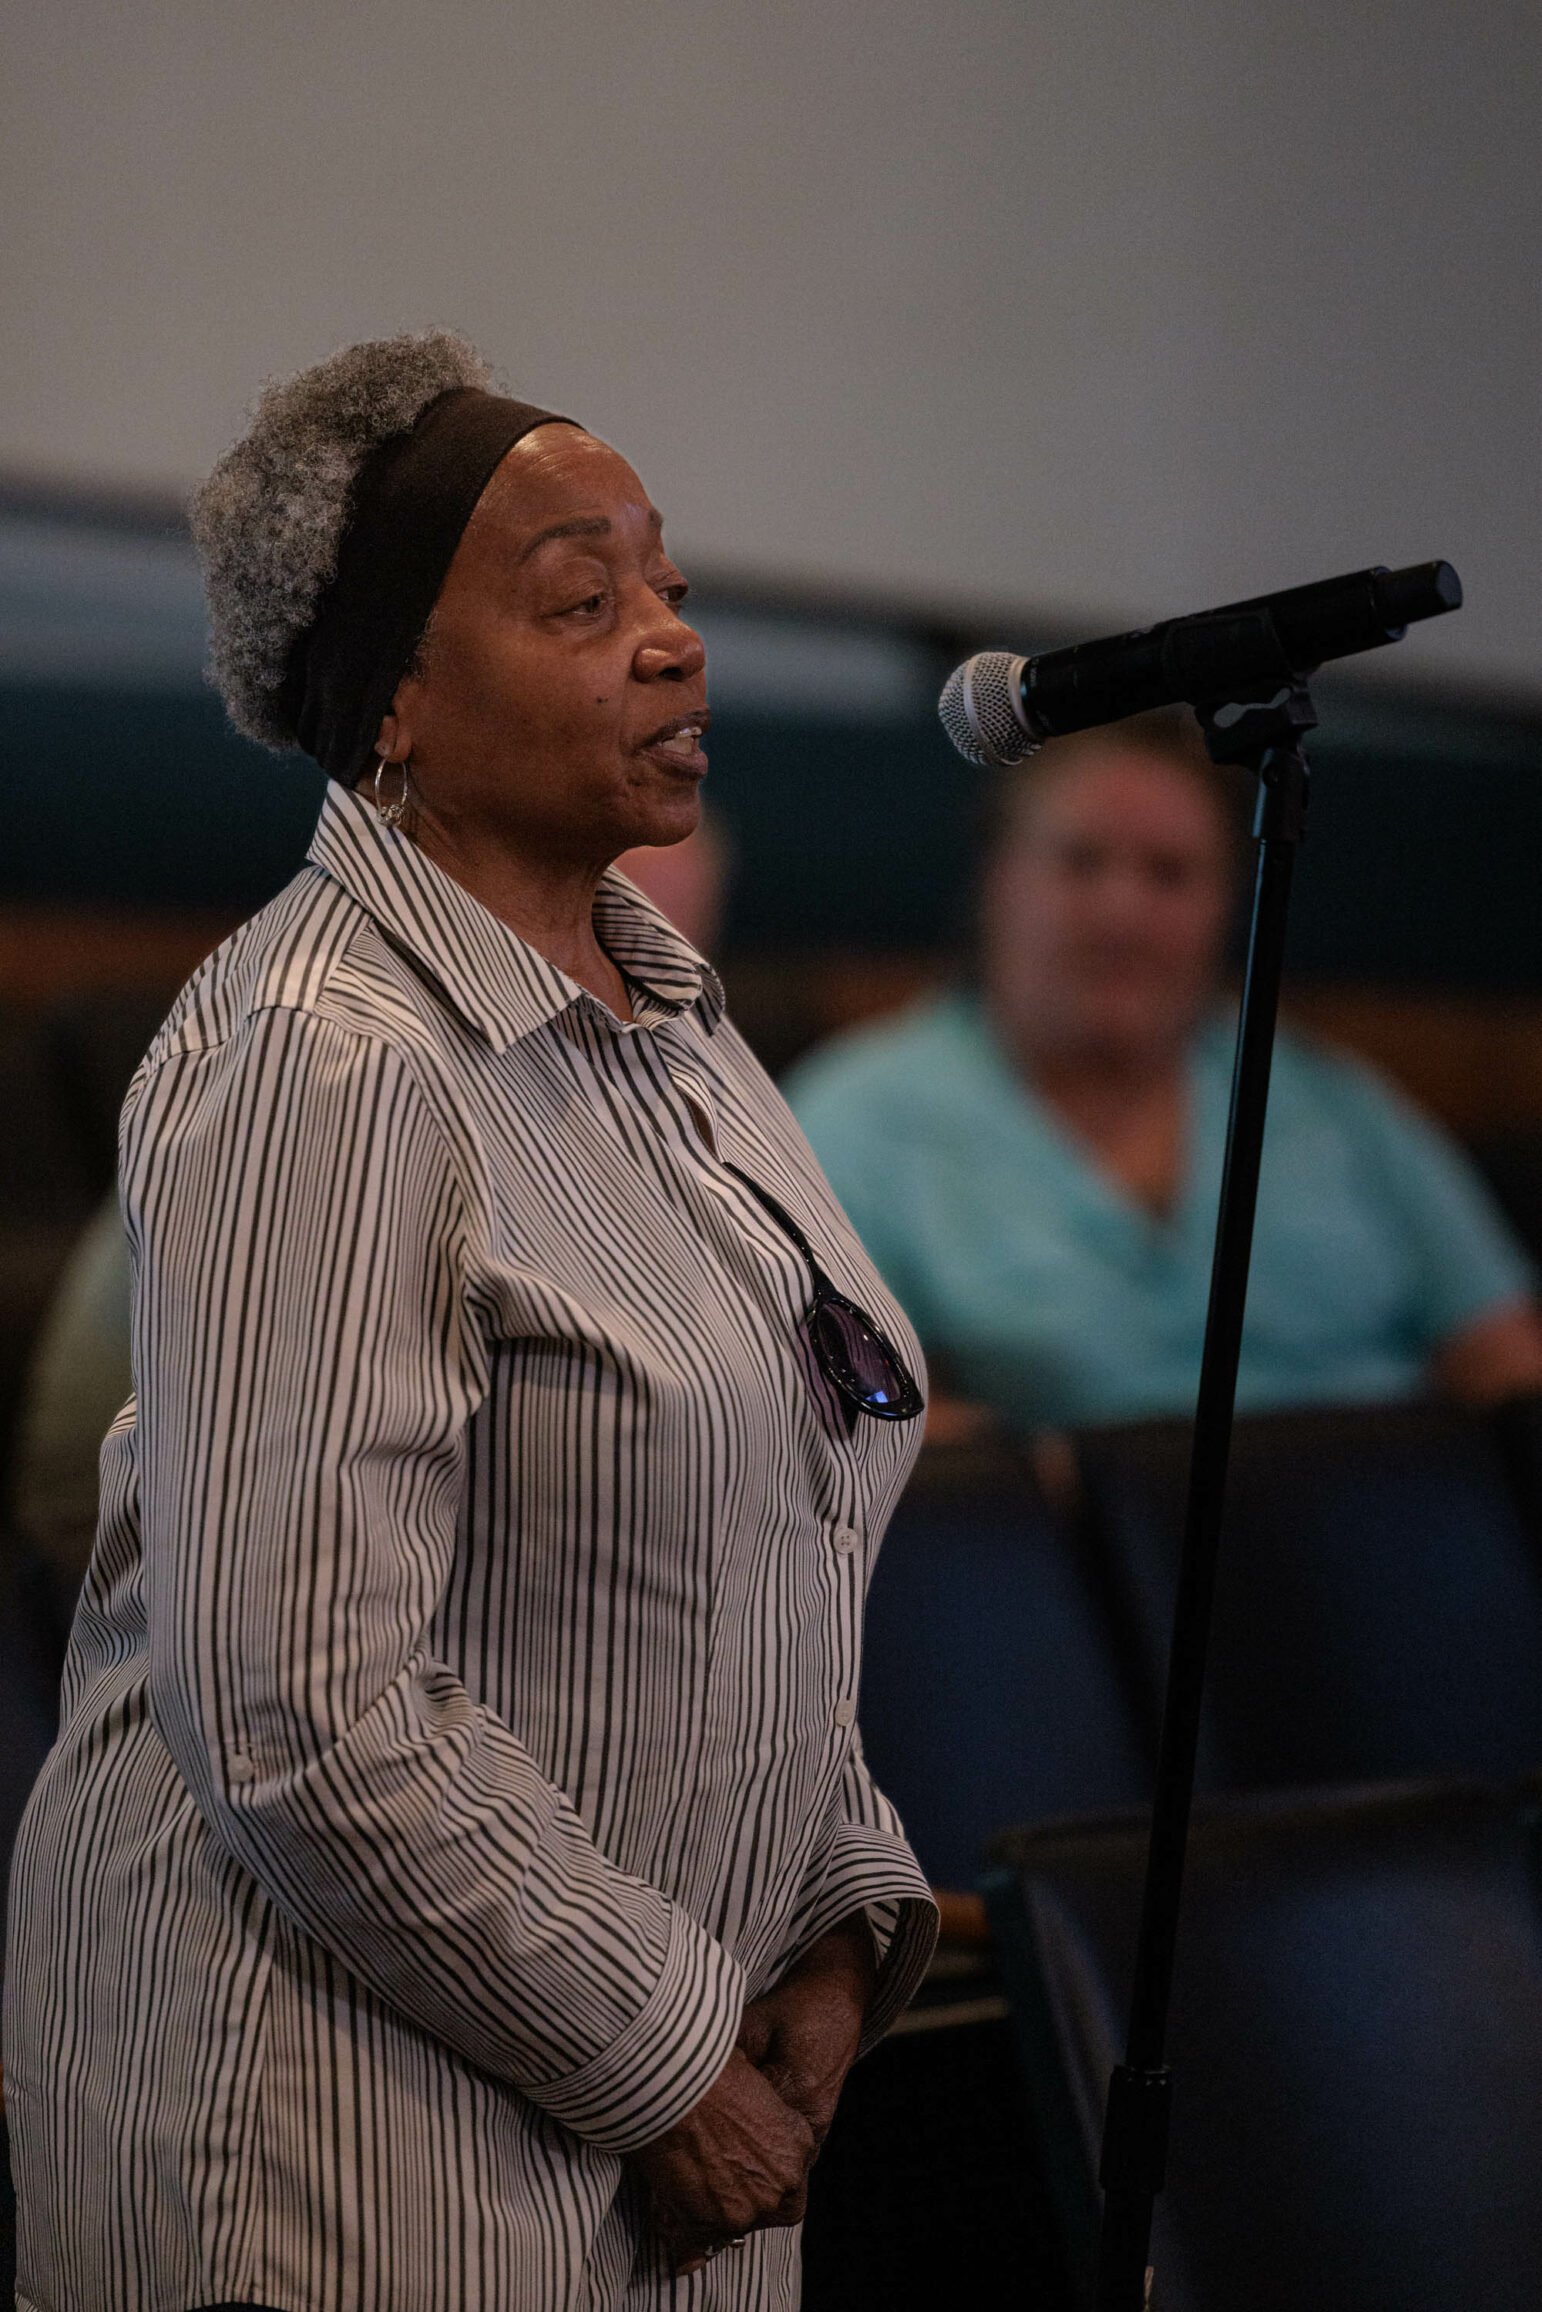 An older woman with gray hair and a headband speaks into a microphone during a town hall meeting. She is wearing a striped shirt and sunglasses hanging from her shirt. Attendees are seated in the background, listening attentively.